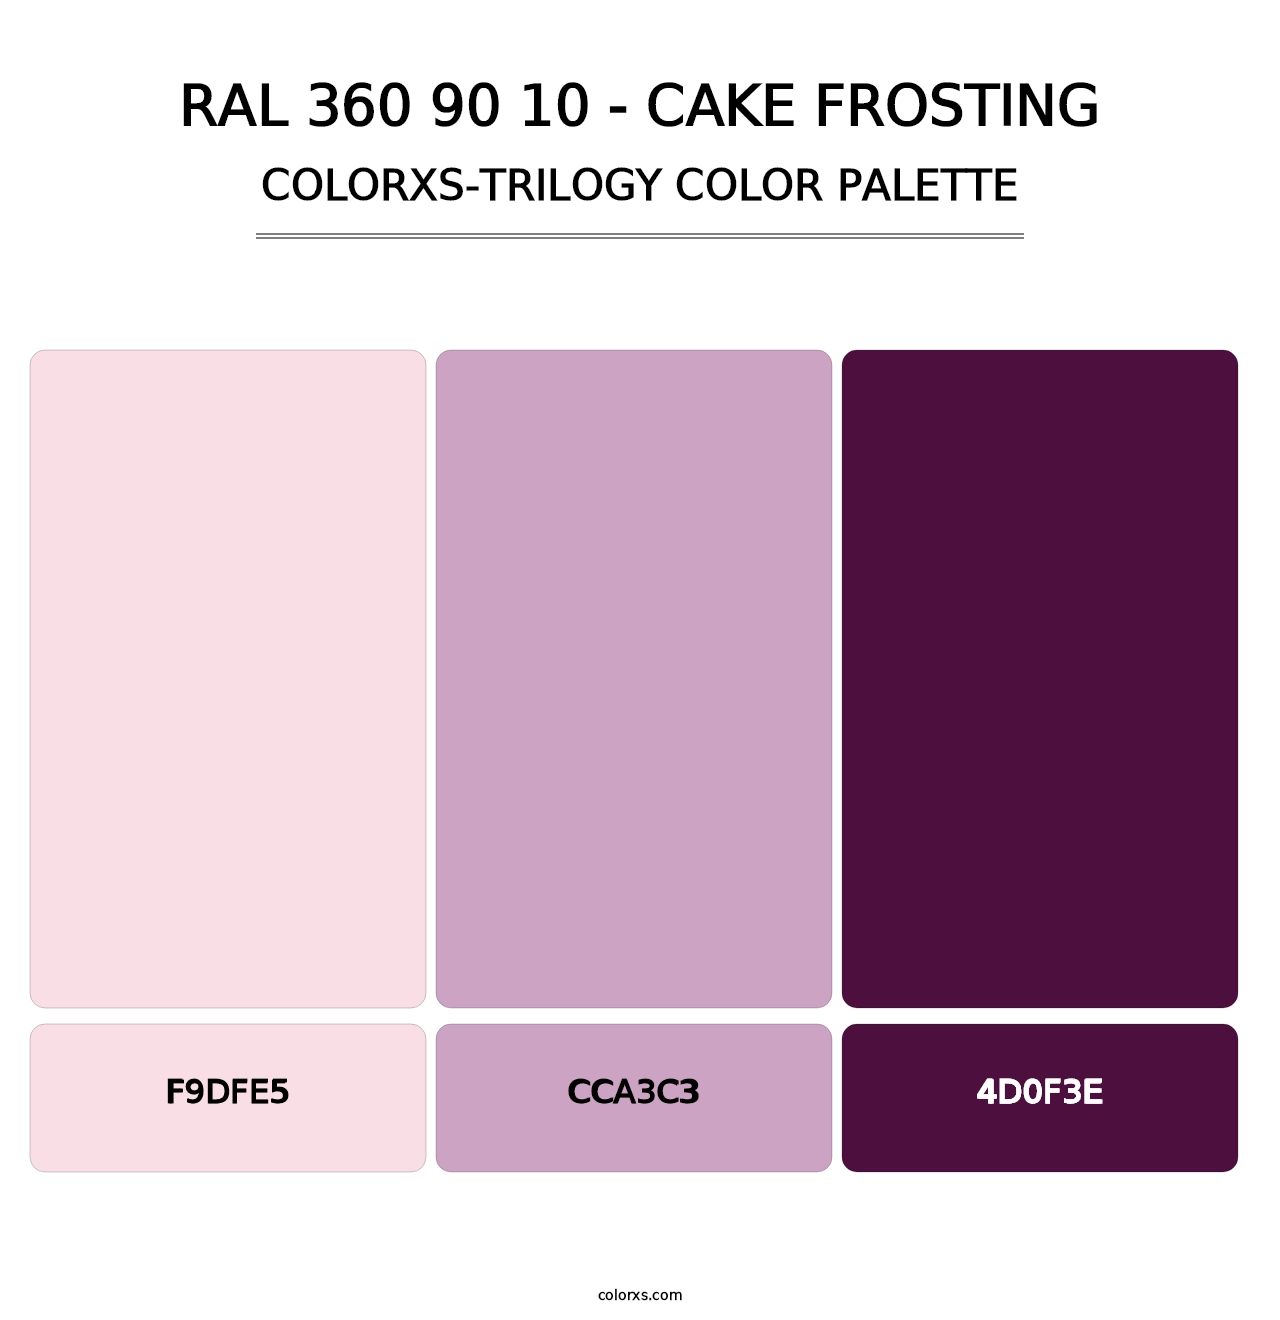 RAL 360 90 10 - Cake Frosting - Colorxs Trilogy Palette